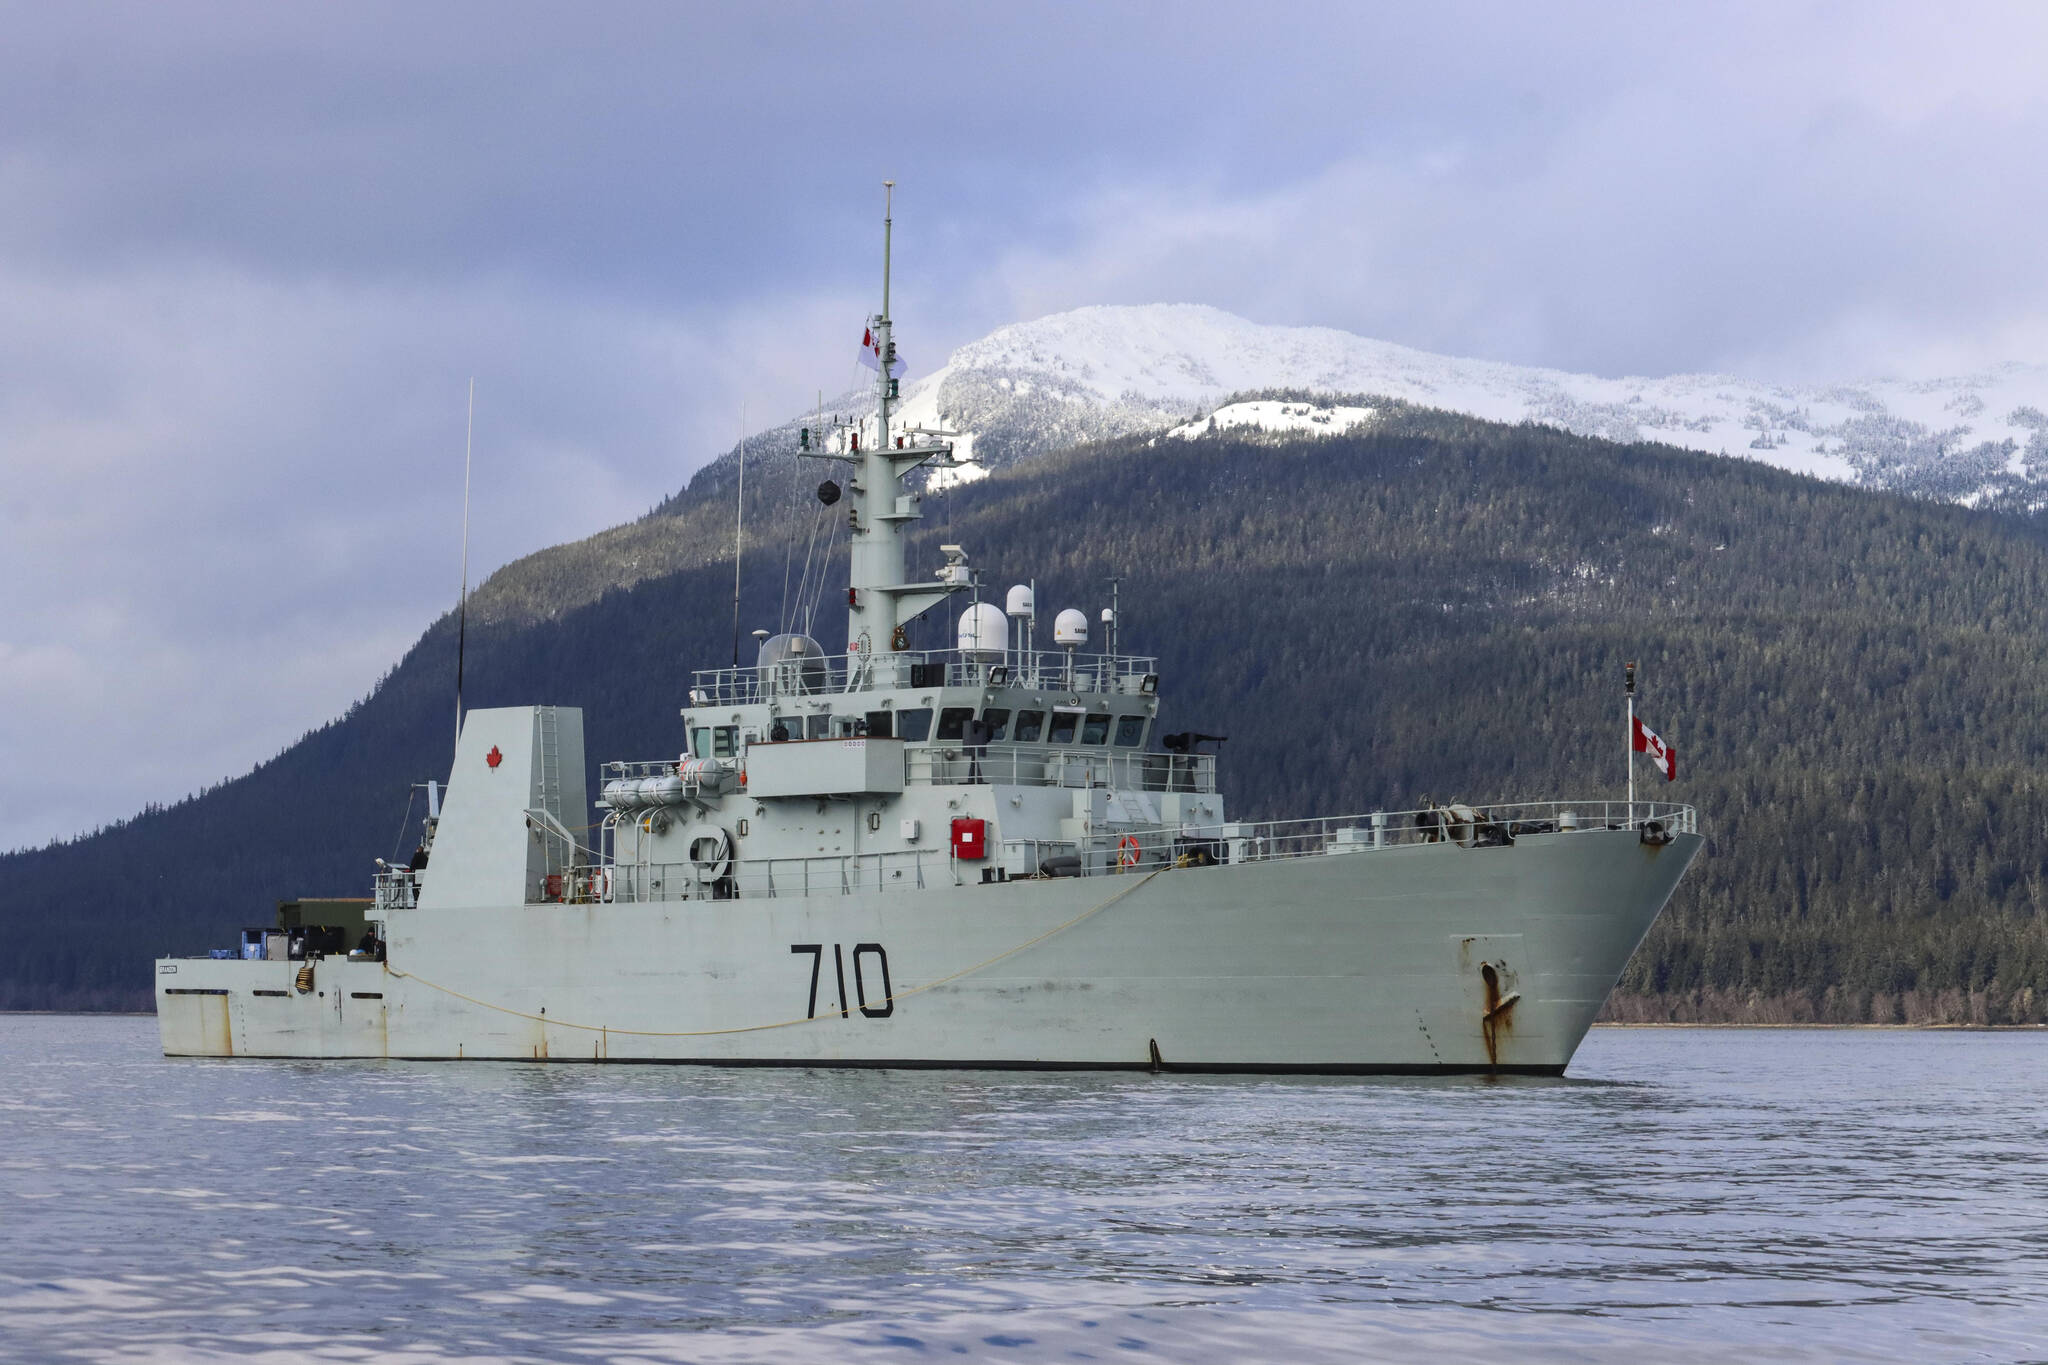 Her Majesty’s Canadian Ship Brandon lies at anchor in the Stephens Passage as divers investigate a simulated naval mine on March 6, 2022, as part of exercise Arctic Edge 2022. (Michael S. Lockett / Juneau Empire)